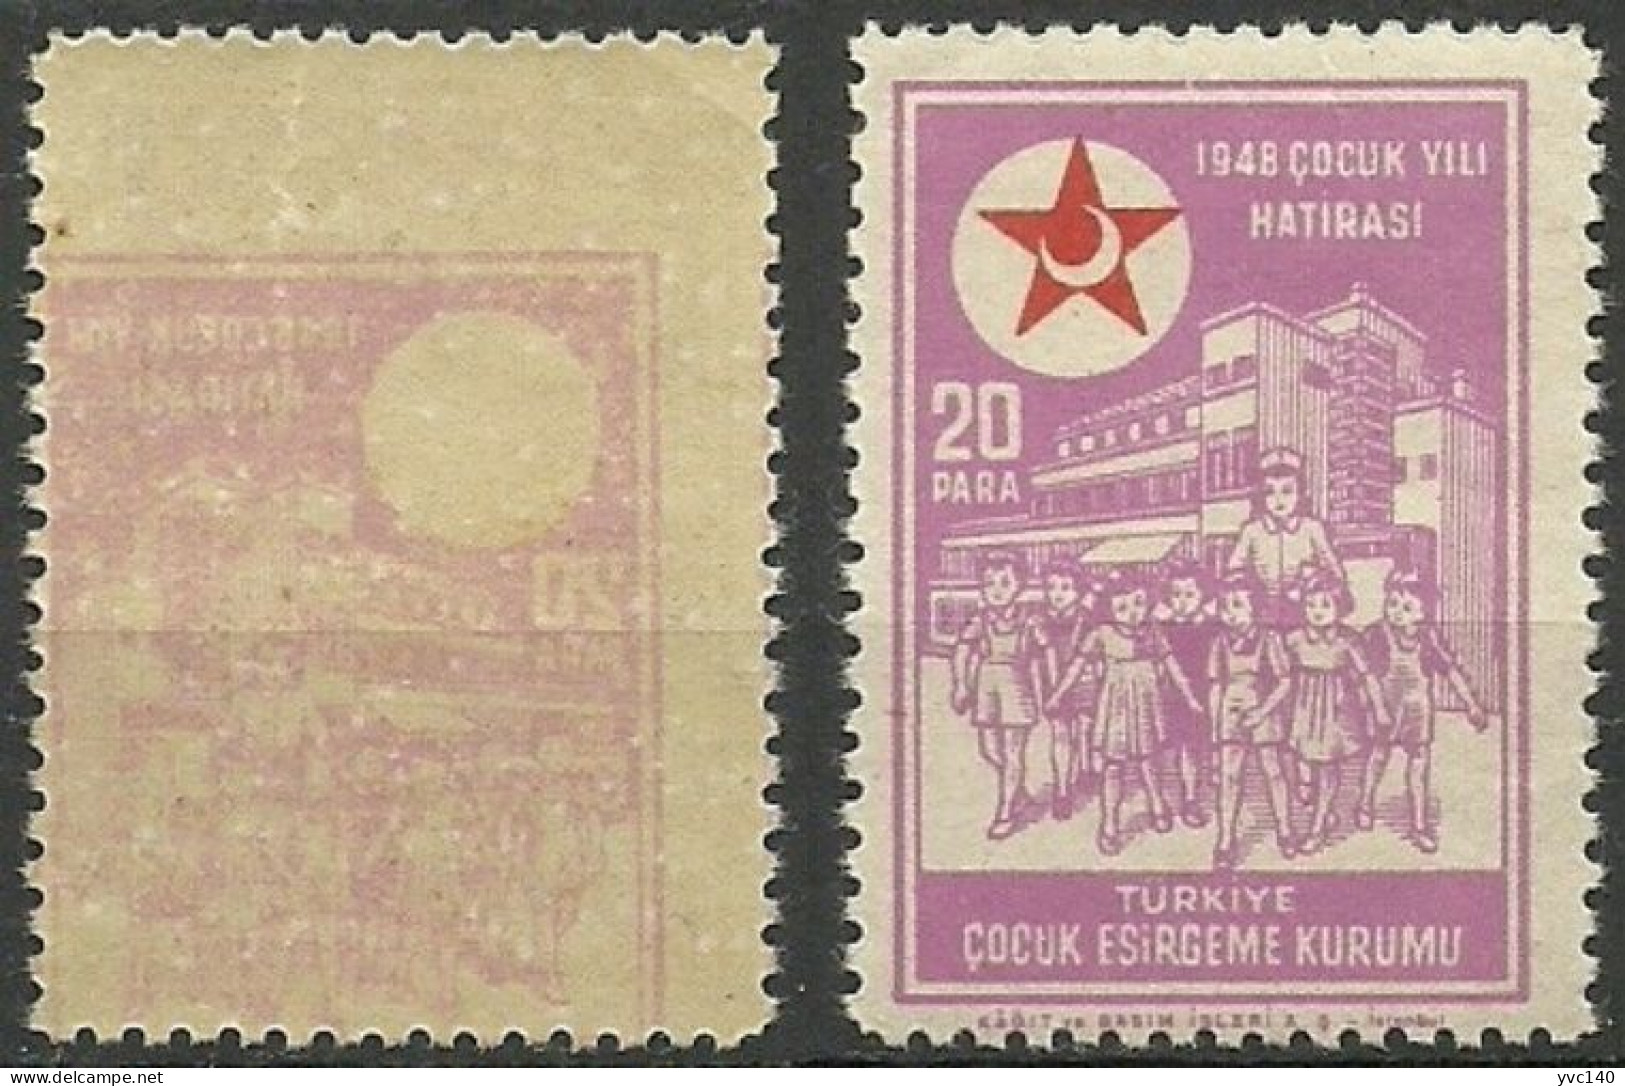 Turkey; 1948 Society For The Protection Of Children 20 P. "Abklatsch" - Charity Stamps